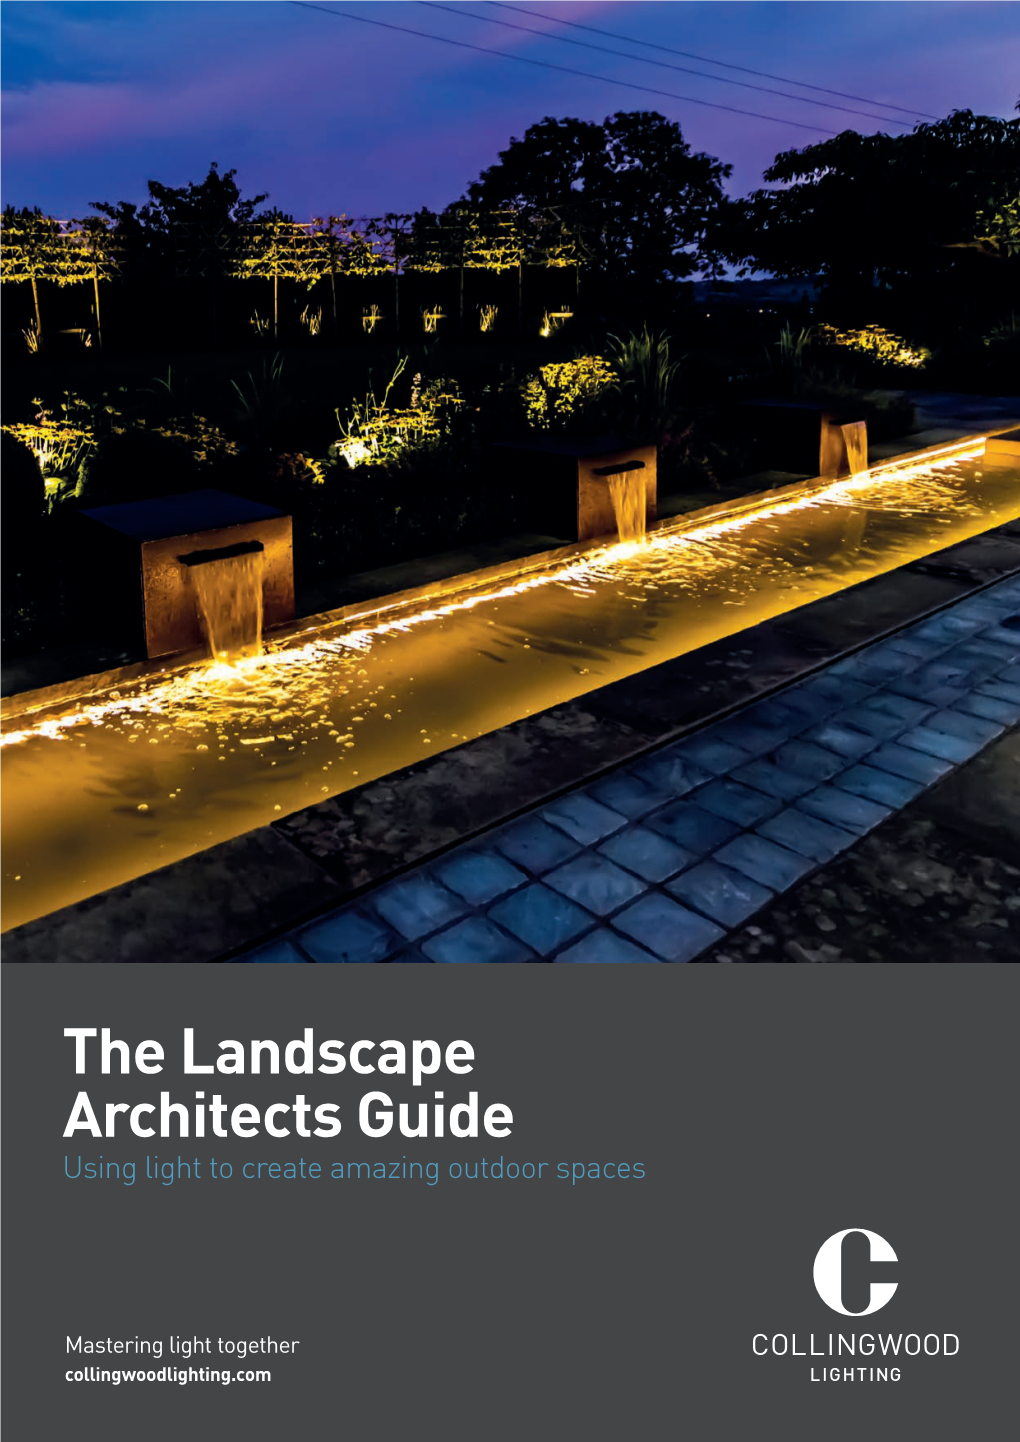 The Landscape Architects Guide Using Light to Create Amazing Outdoor Spaces